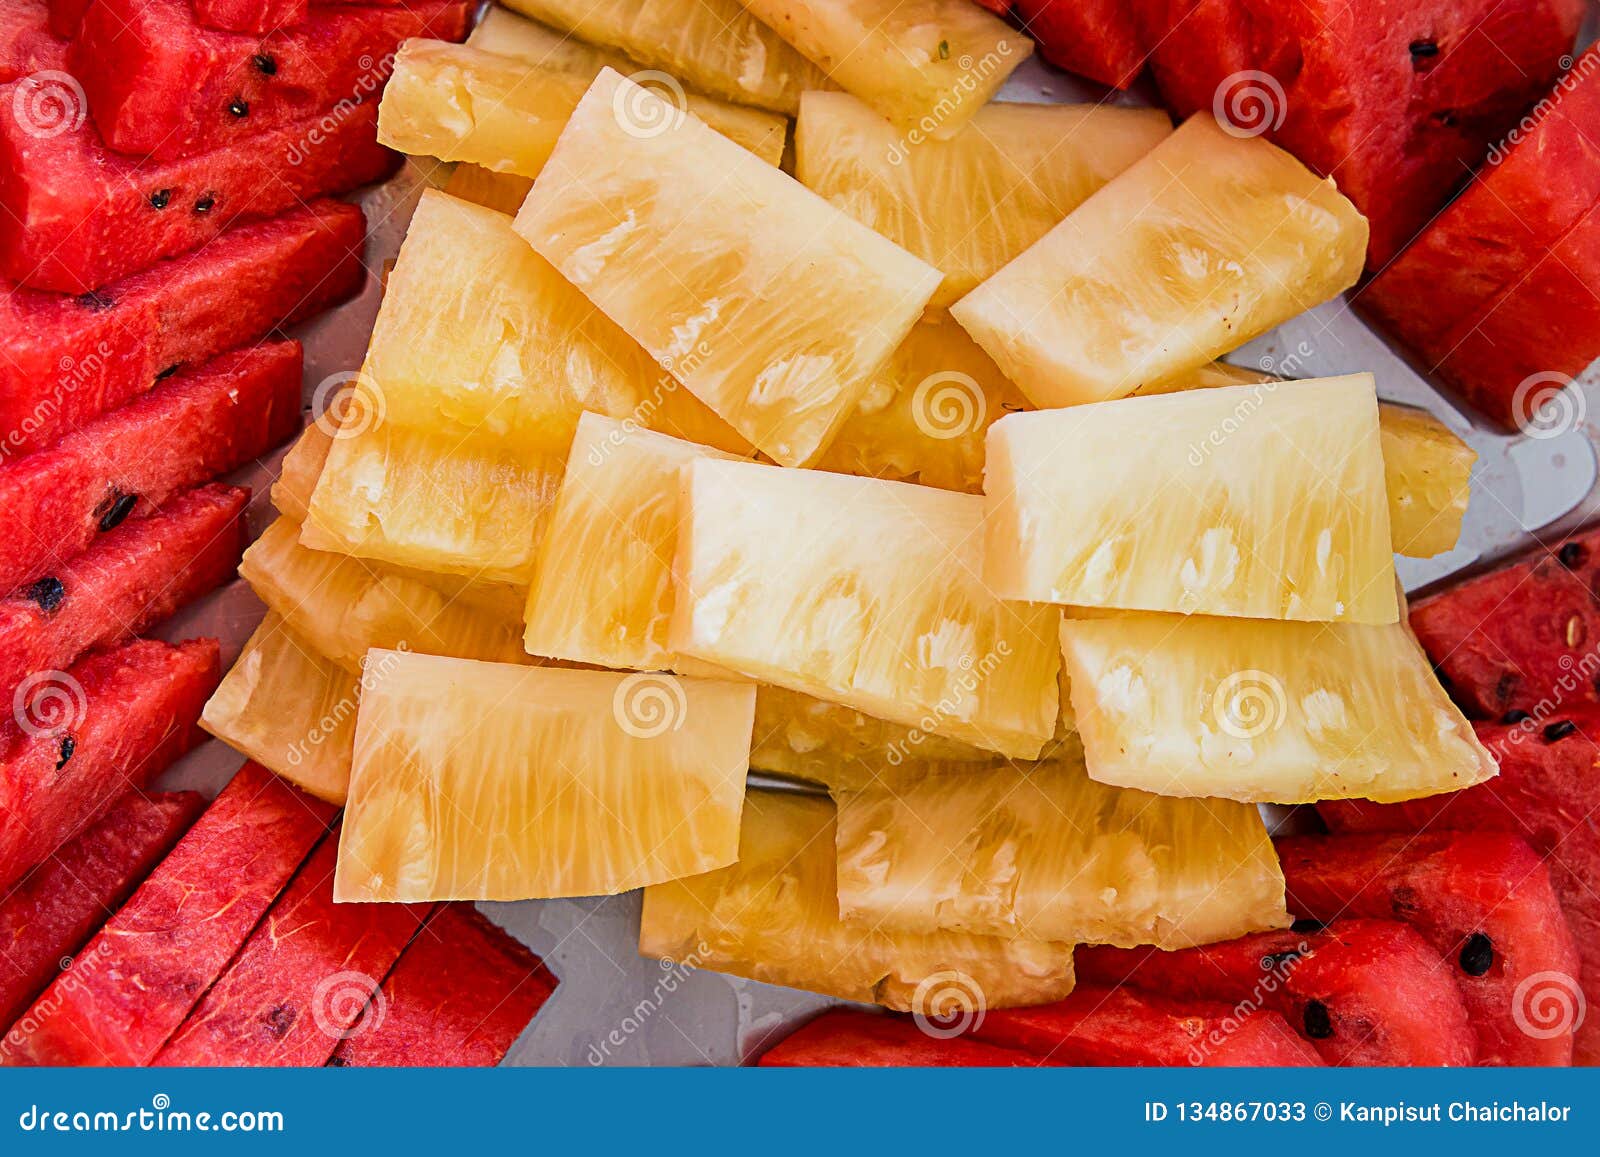 assorted exotic fresh fruits. slide and peice of fresh fruit on white plate.